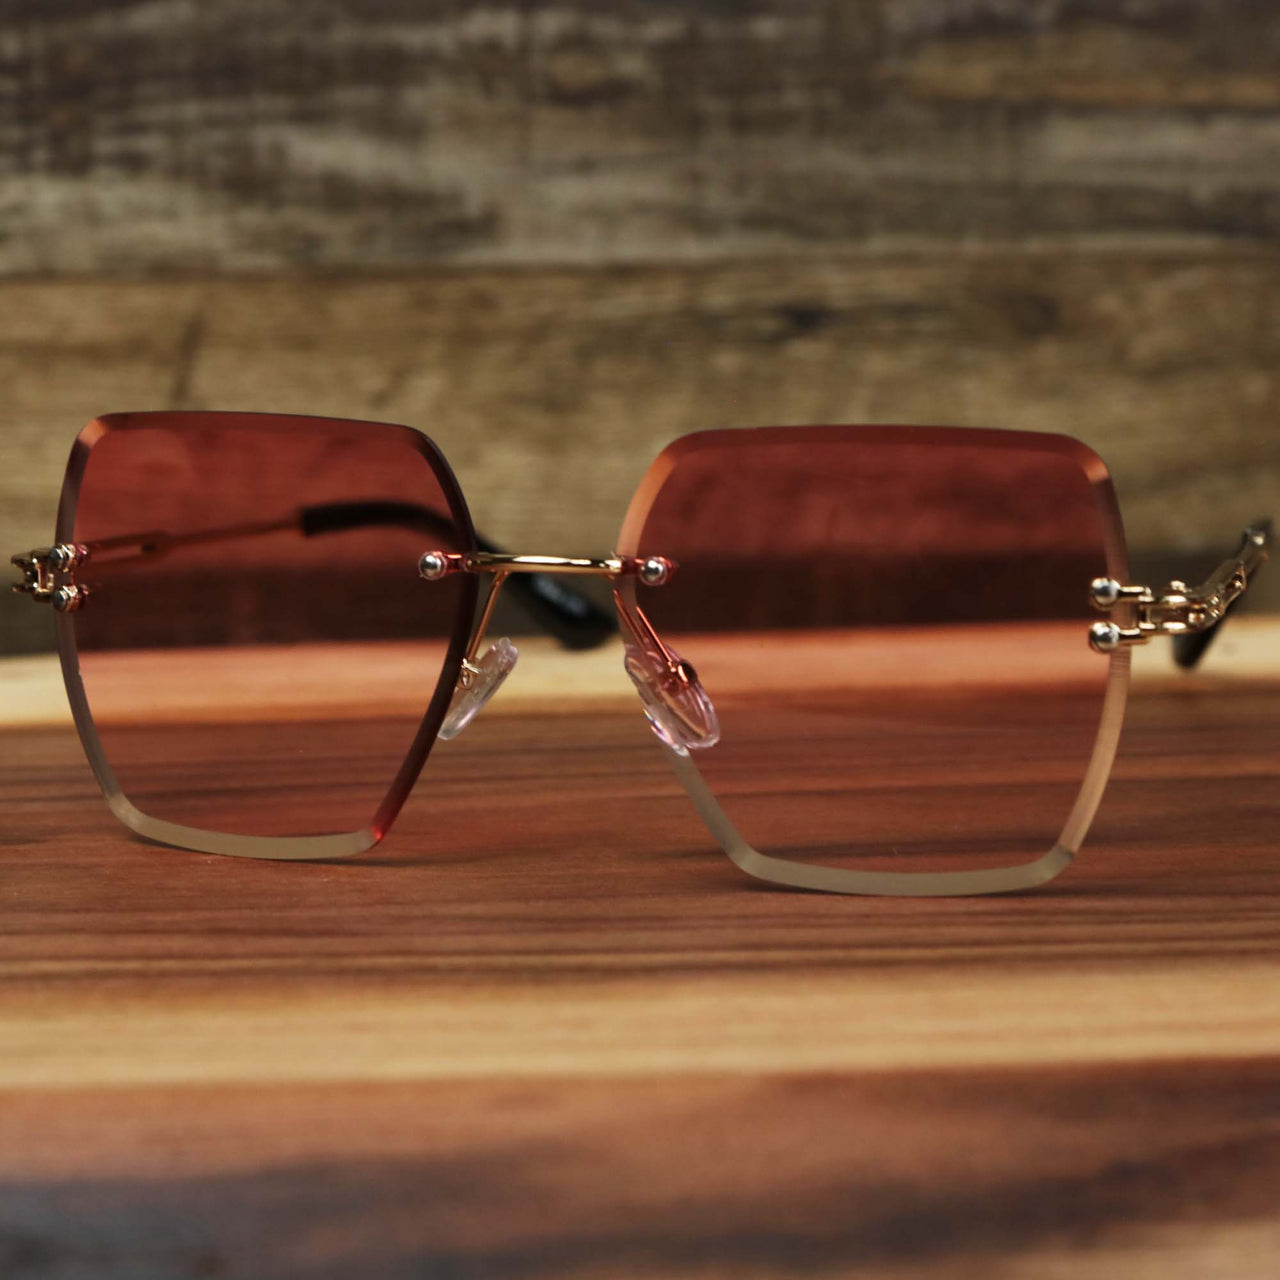 The Large Lightweight Frame Pink Lens Sunglasses with Rose Gold Frame